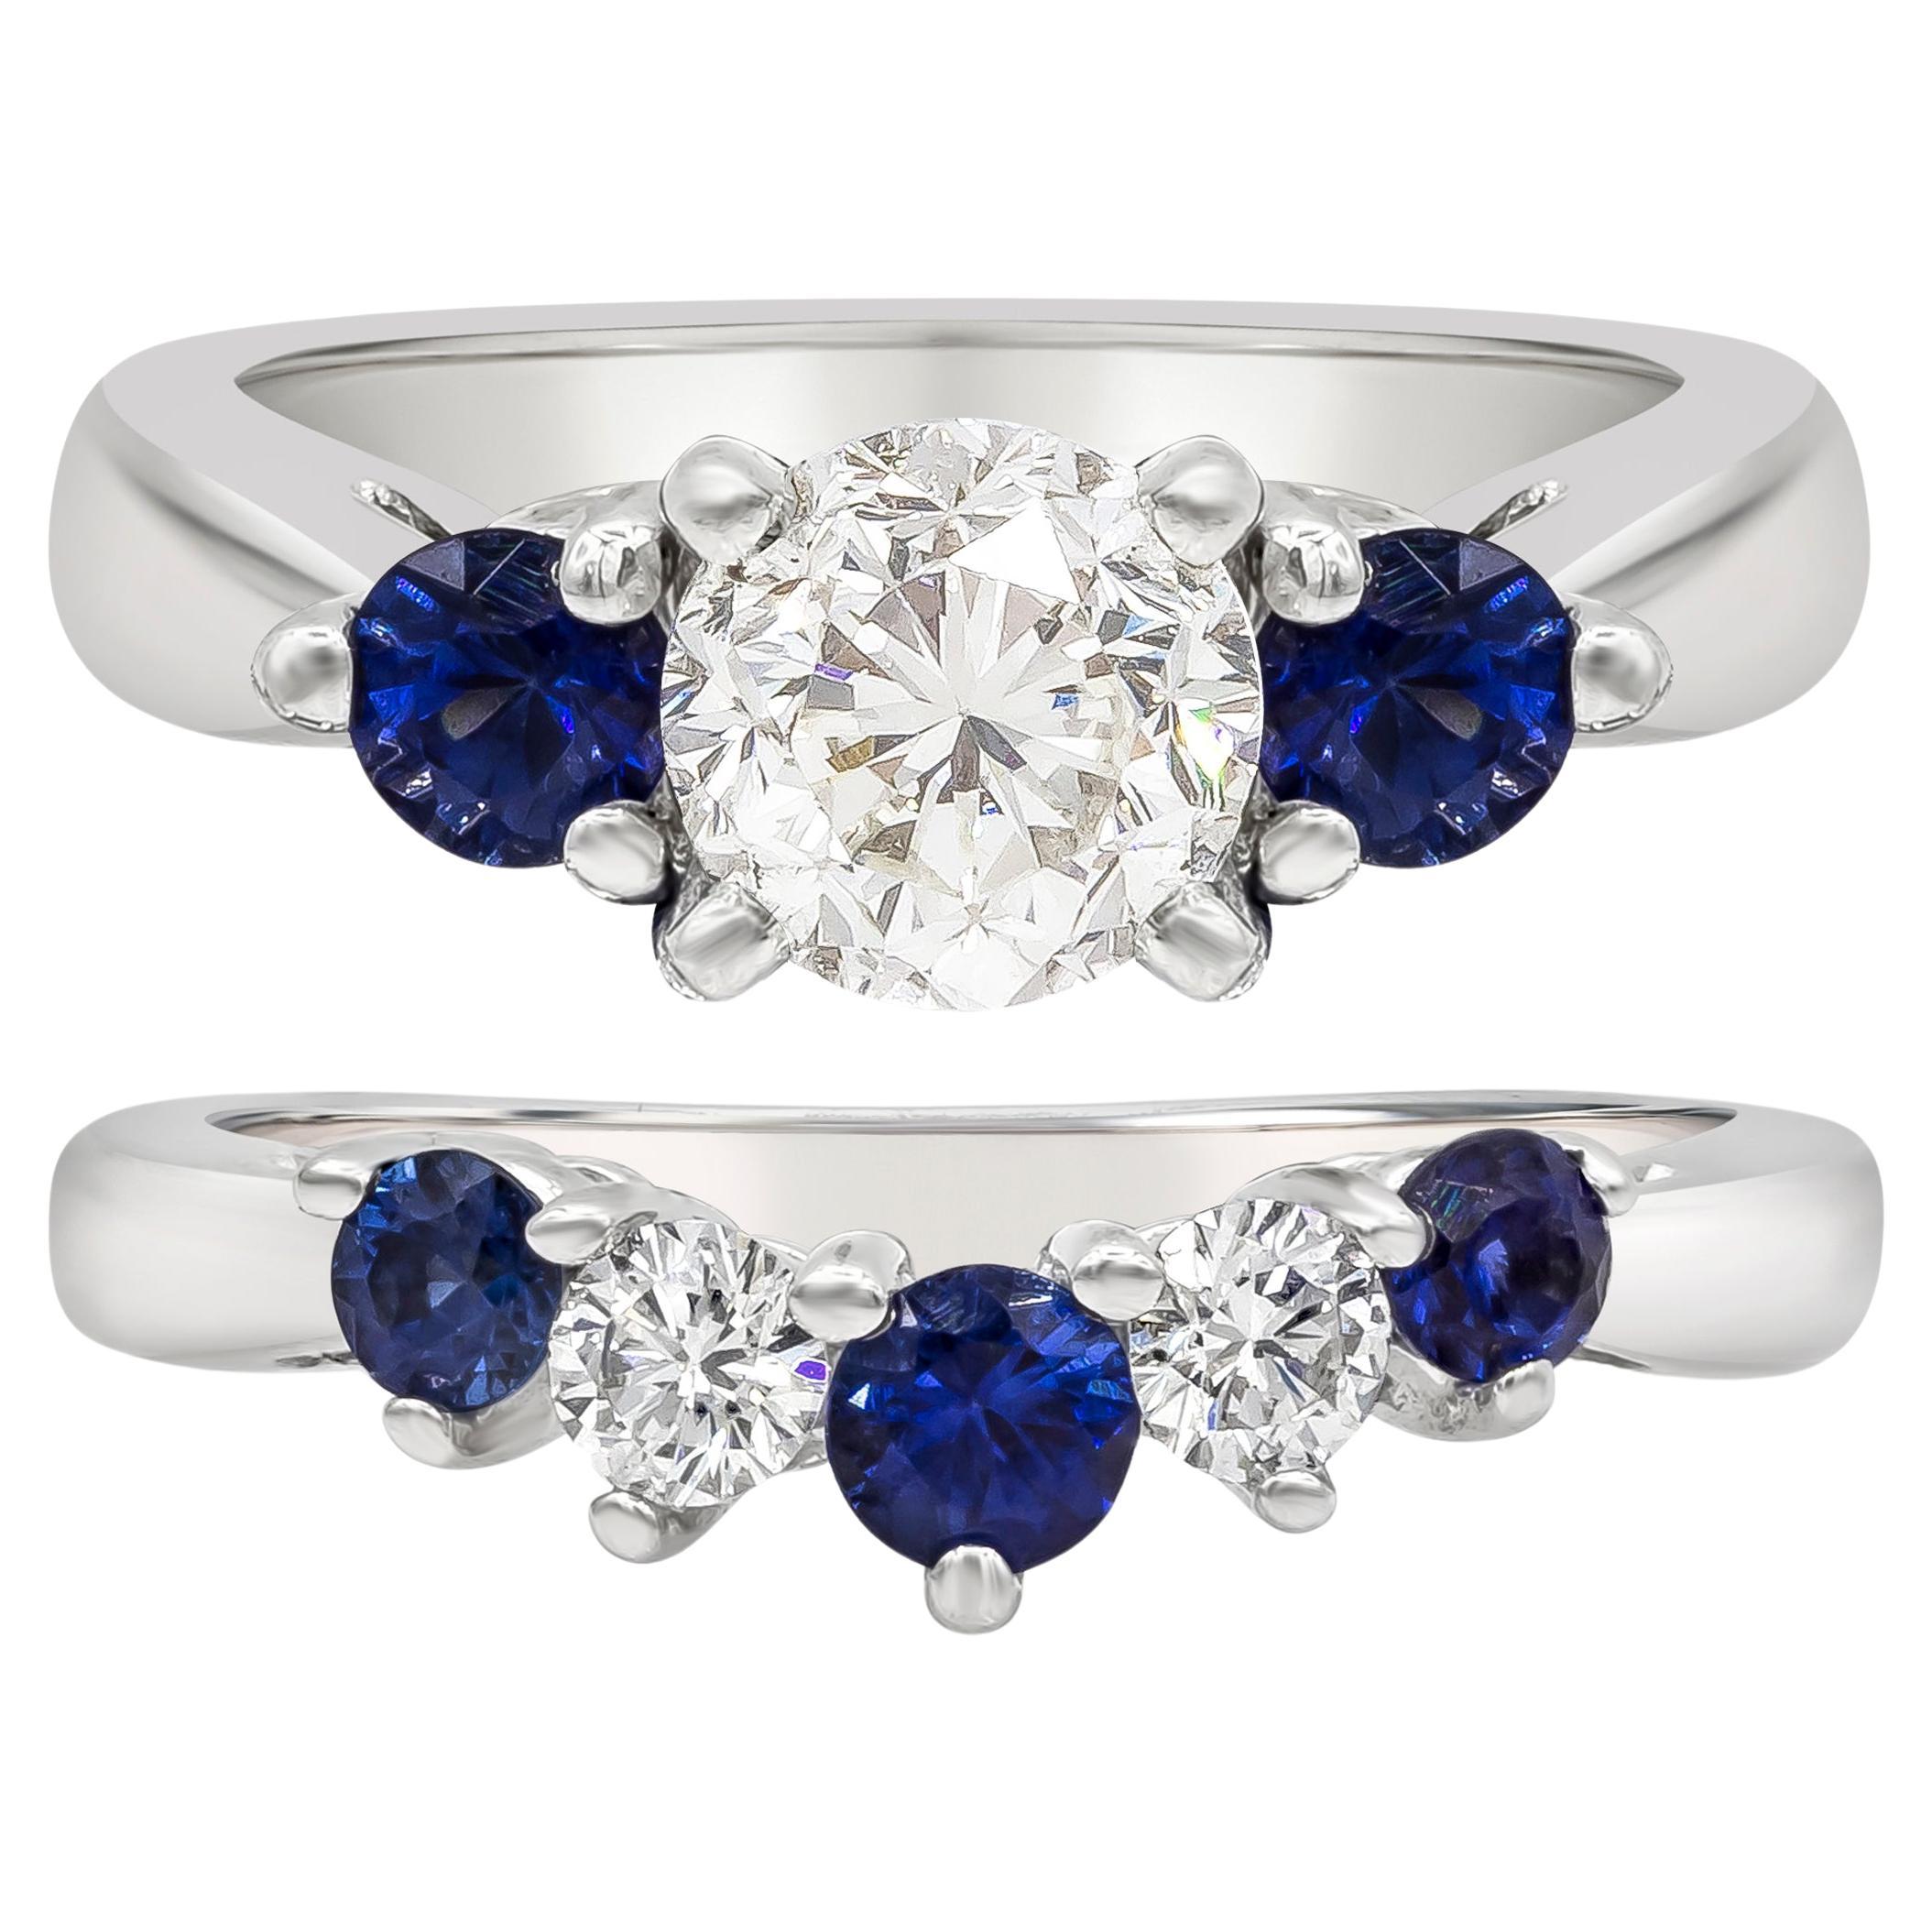 1.89 Carats Total Diamond and Blue Sapphire Wedding Band & Engagement Ring Set